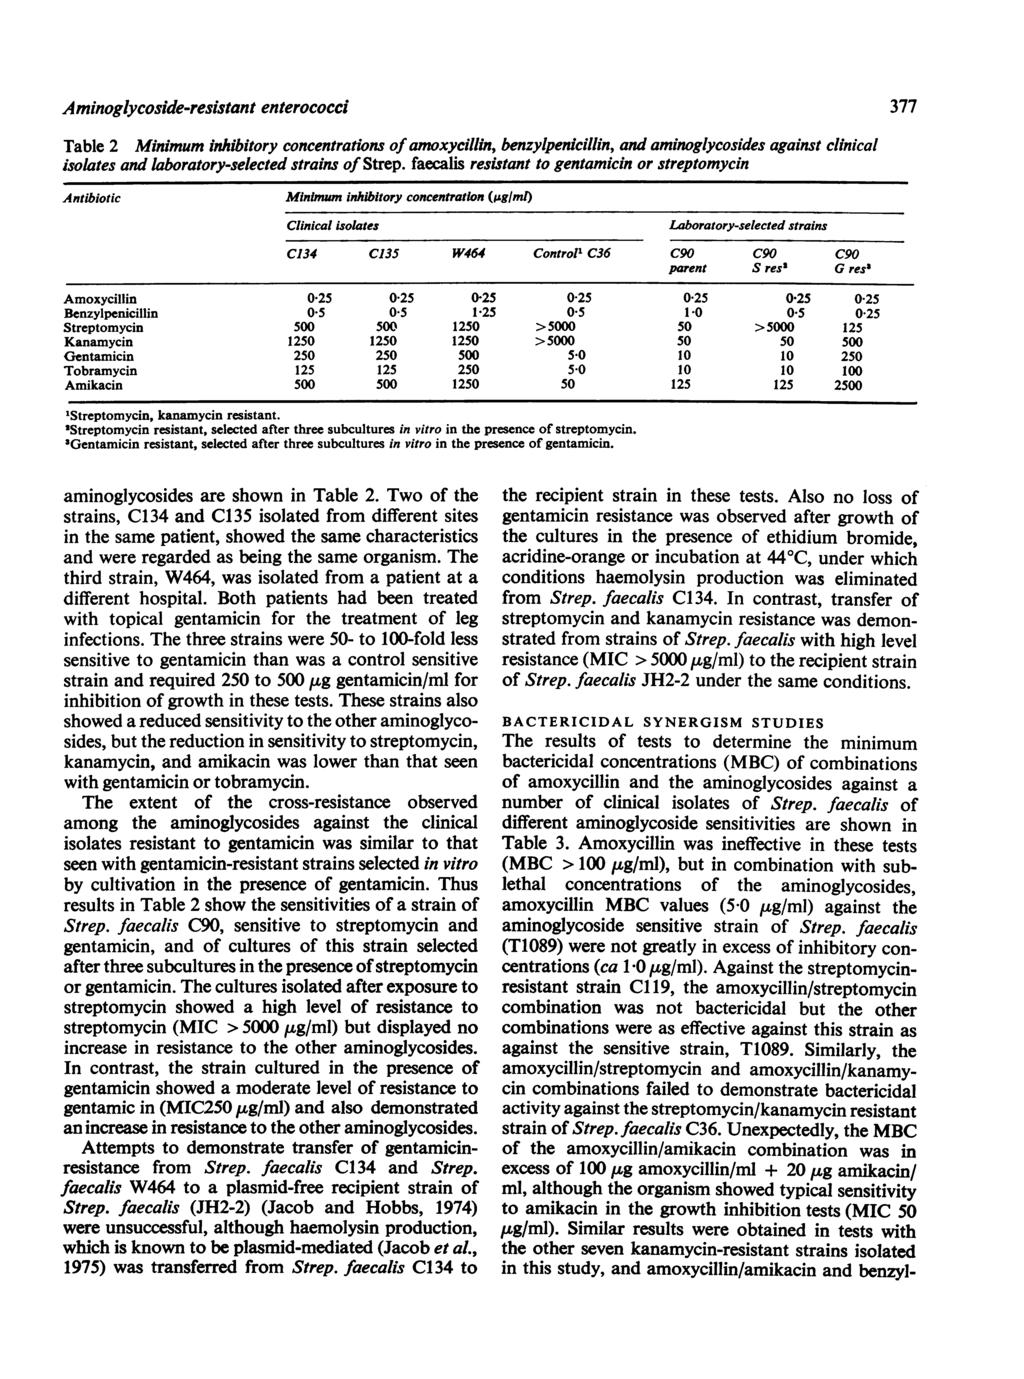 Aminoglycoside-resistant enterococci Table 2 isolates and laboratory-selected strains of Strep.